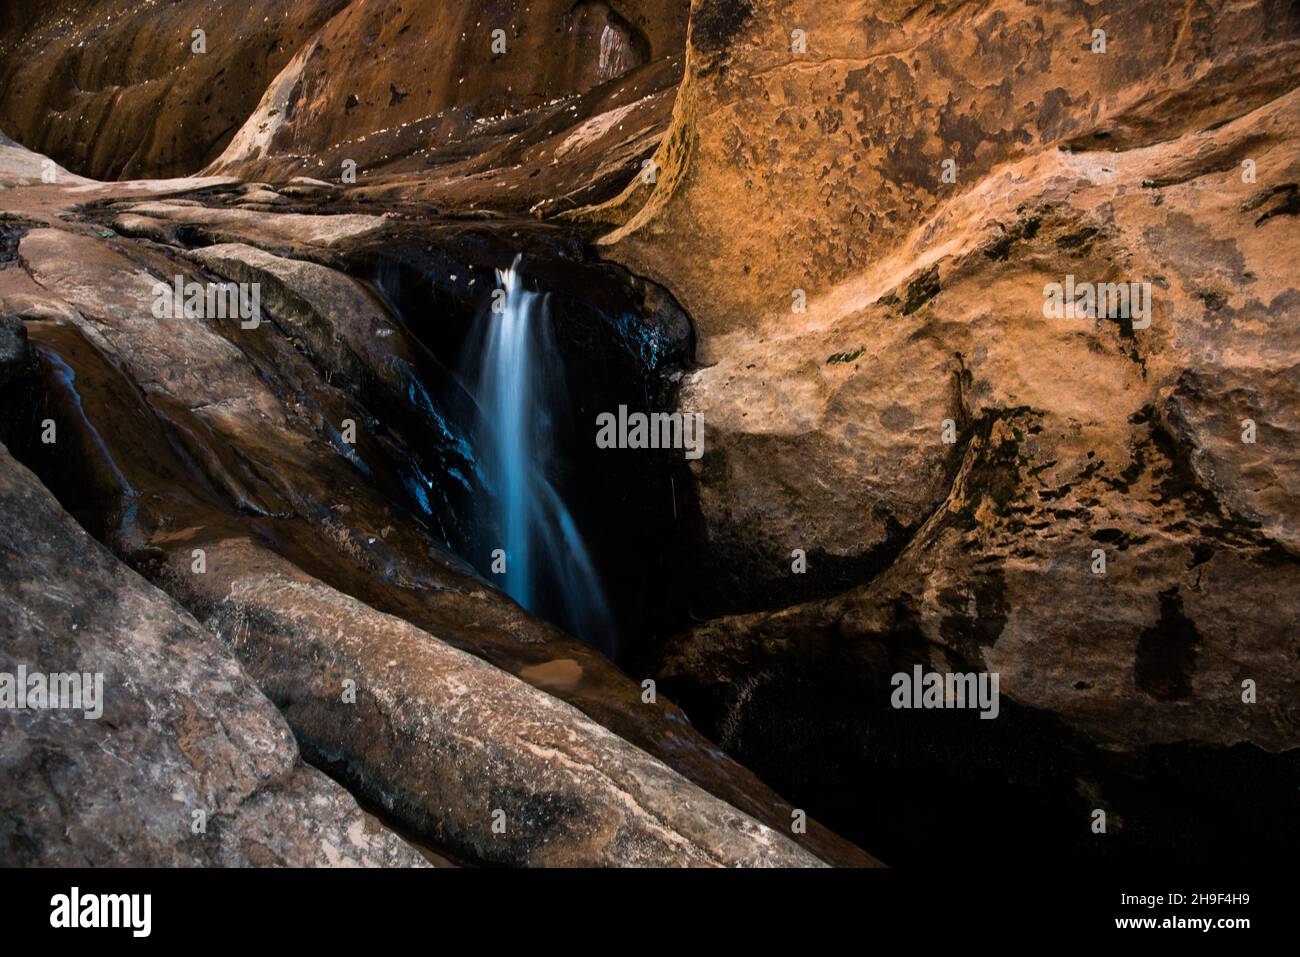 Pure, clean water trickles through the sandstone of high mountain cliffs.  The sandstone creates a natural filtration system. Stock Photo